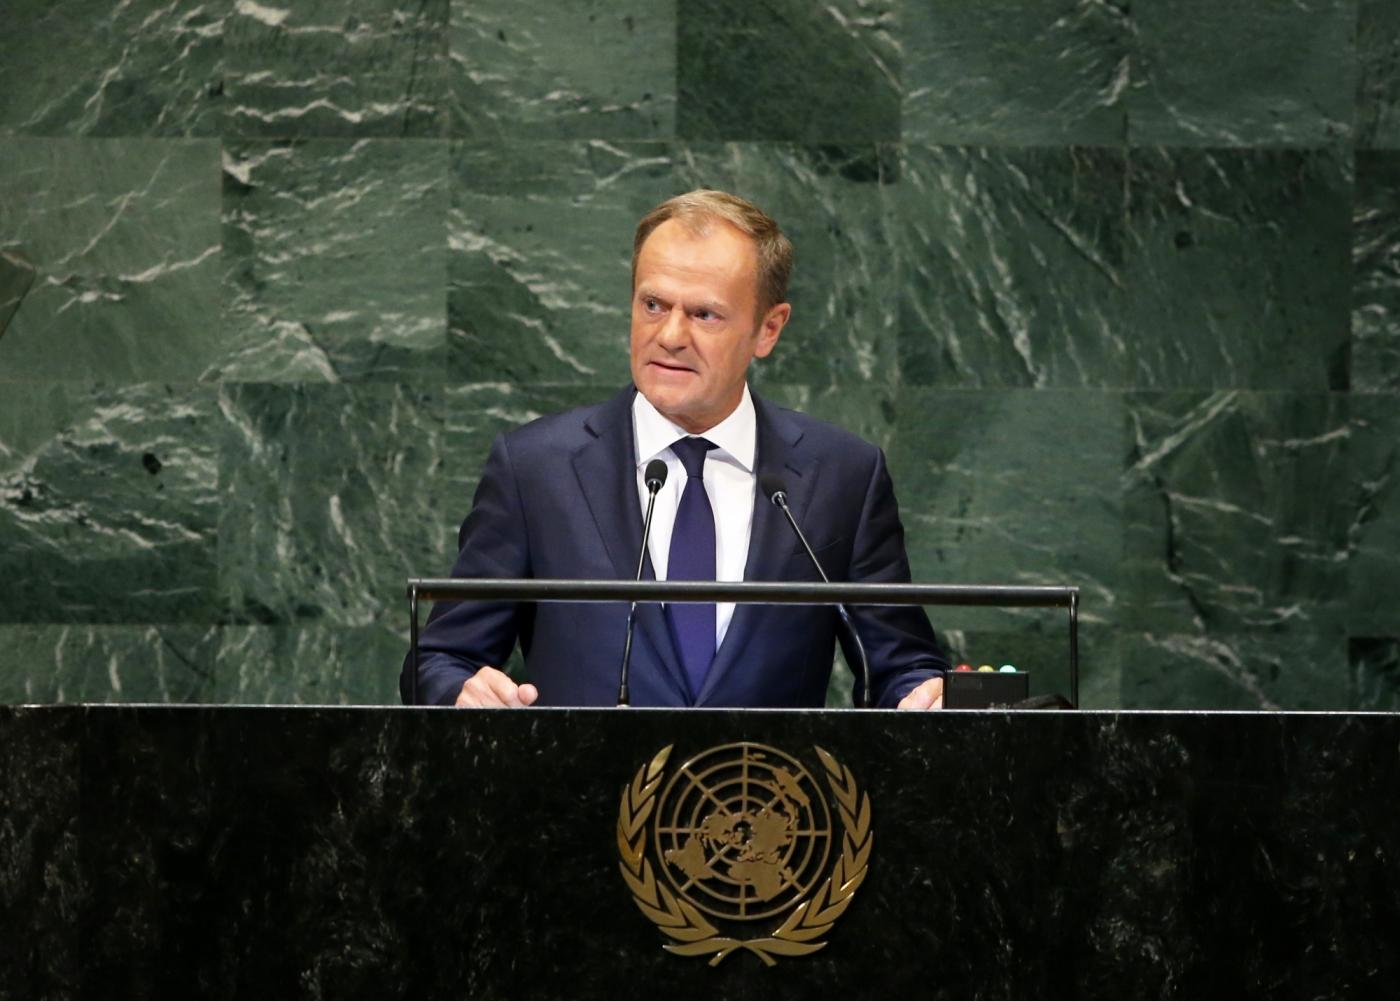 UNITED NATIONS, Sept. 27, 2018 (Xinhua) -- European Council President Donald Tusk addresses the General Debate of the 73rd session of the United Nations General Assembly at the UN headquarters in New York, on Sept. 27, 2018. (Xinhua/Qin Lang/IANS) by .